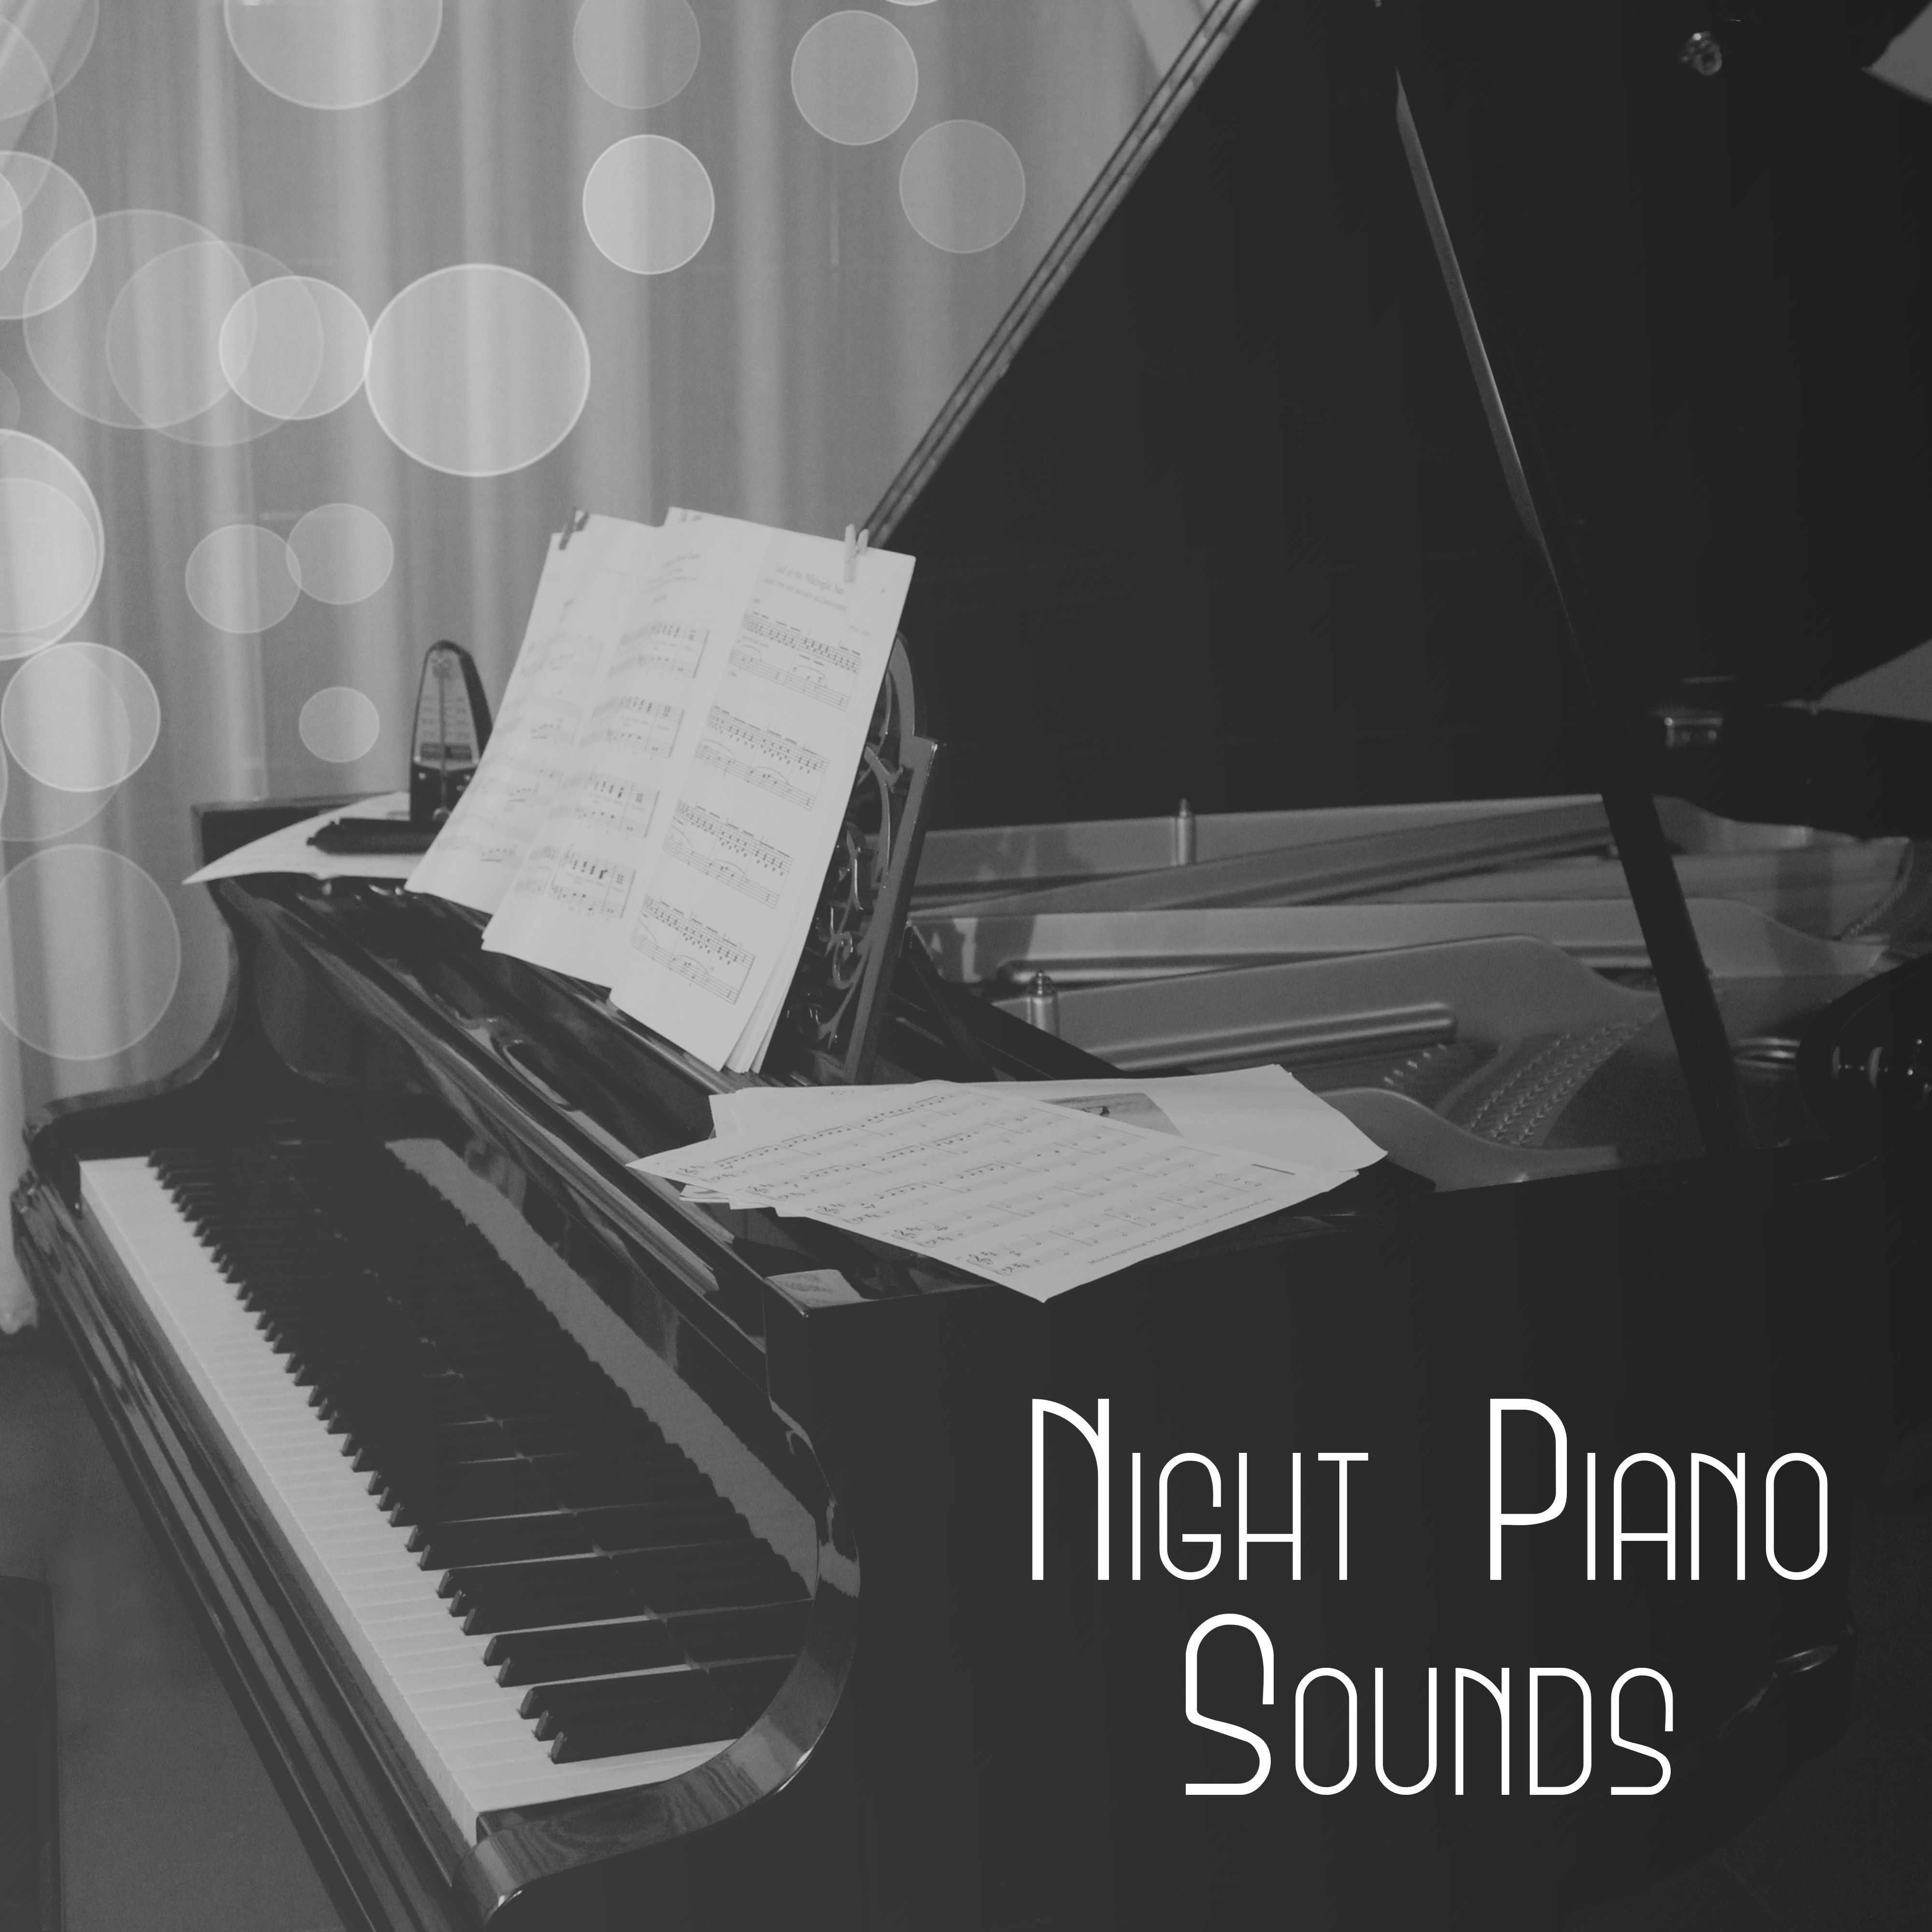 Night Piano Sounds – Peaceful Jazz, Instrumental Music for Relaxation, Dinner by Candlelight, Soothing Piano, Mellow Jazz